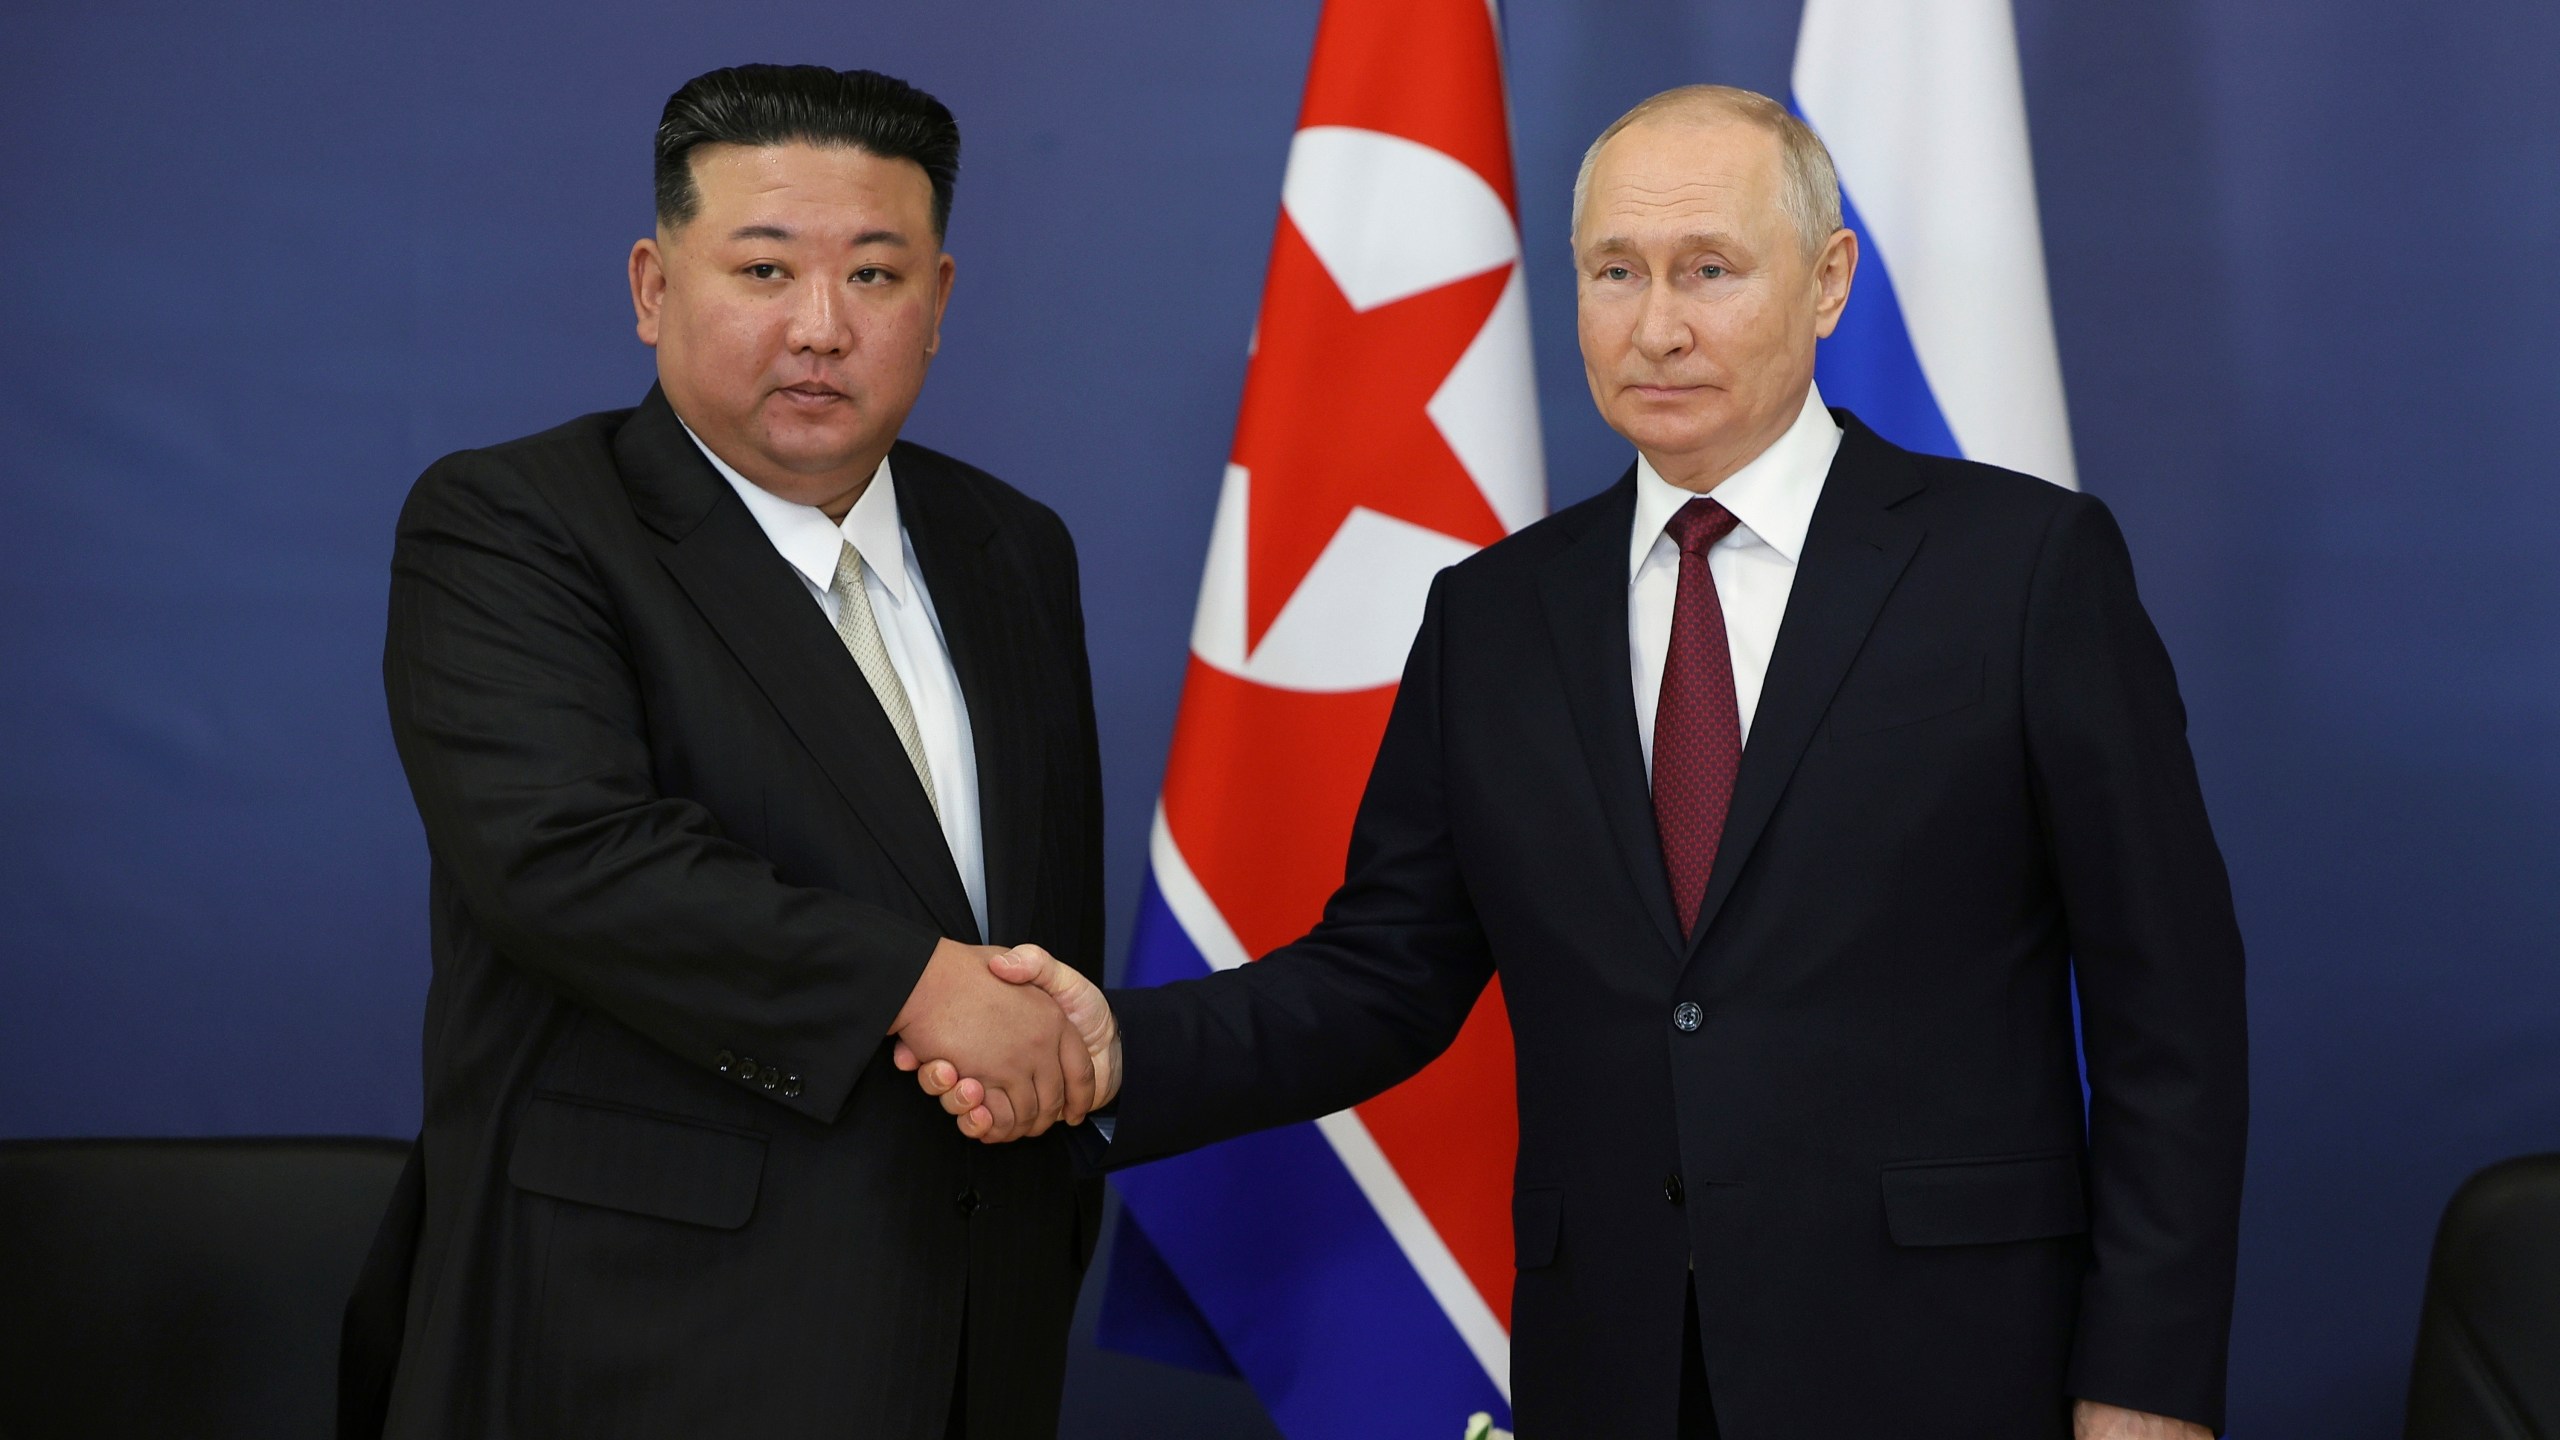 FILE - Russian President Vladimir Putin, right, and North Korean leader Kim Jong Un shake hands during their meeting at the Vostochny cosmodrome outside the city of Tsiolkovsky, about 200 kilometers (125 miles) from the city of Blagoveshchensk in the far eastern Amur region, Russia on Sept. 13, 2023. North Korea has shipped around 7,000 containers filled with munitions and other military equipment to Russia since 2023 to help support its war in Ukraine, South Korea’s defense minister said Monday, March 18, 2024. (Vladimir Smirnov/Sputnik Kremlin Pool Photo via AP, File)